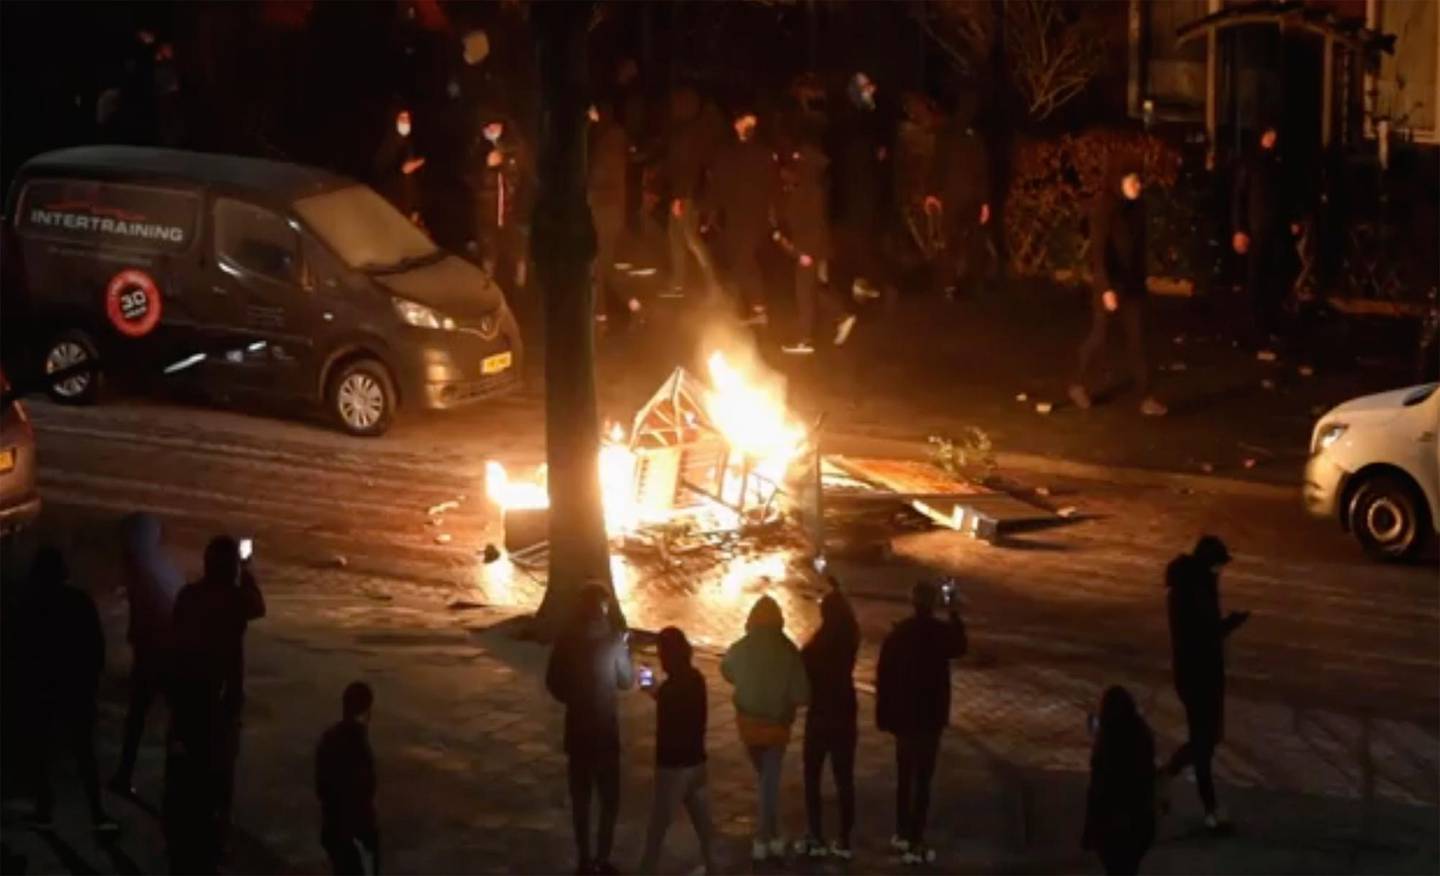 In this grab taken from video on Monday, Jan, 25, 2021, people use their phones to film items burning on a fire started by rioters, in Haarlem, Netherlands. Groups of youths have confronted police in several Dutch cities defying the countrys coronavirus curfew and throwing fireworks. Police in the port city of Rotterdam used a water cannon and tear gas in an attempt to disperse a crowd of rioters Monday night. (Mizzle Media via AP)